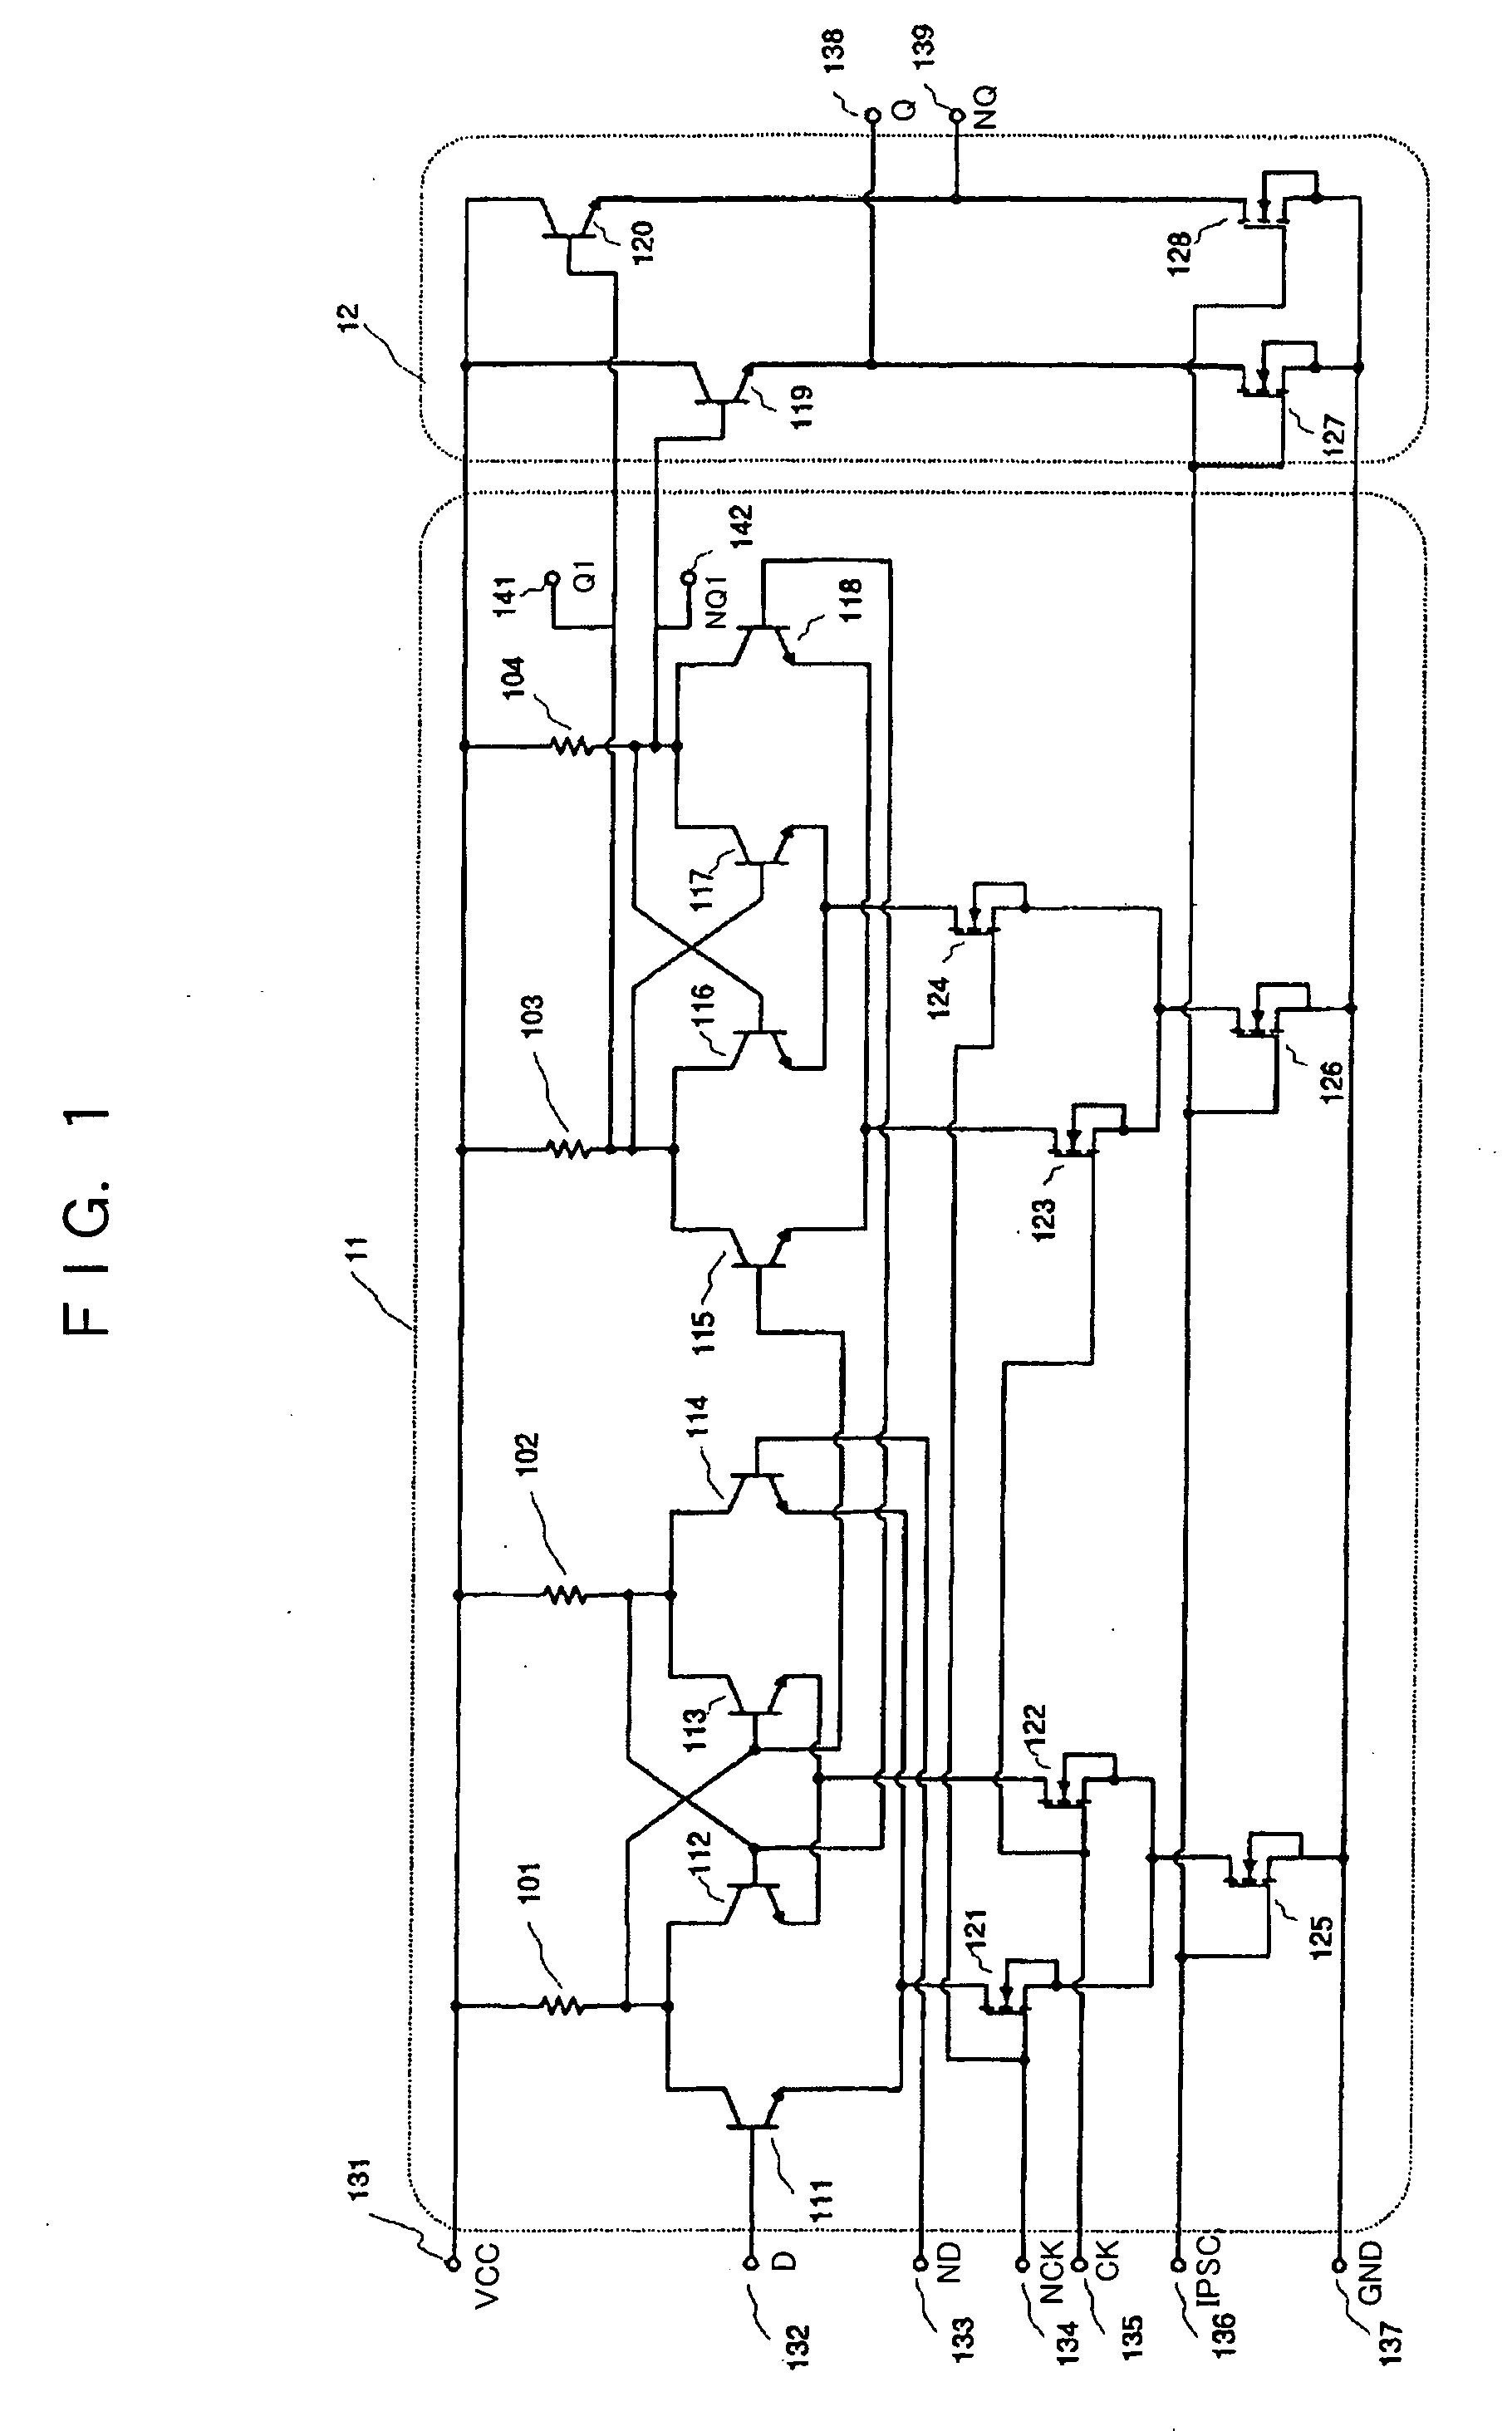 Flip-flop circuit and frequency division circuit using same